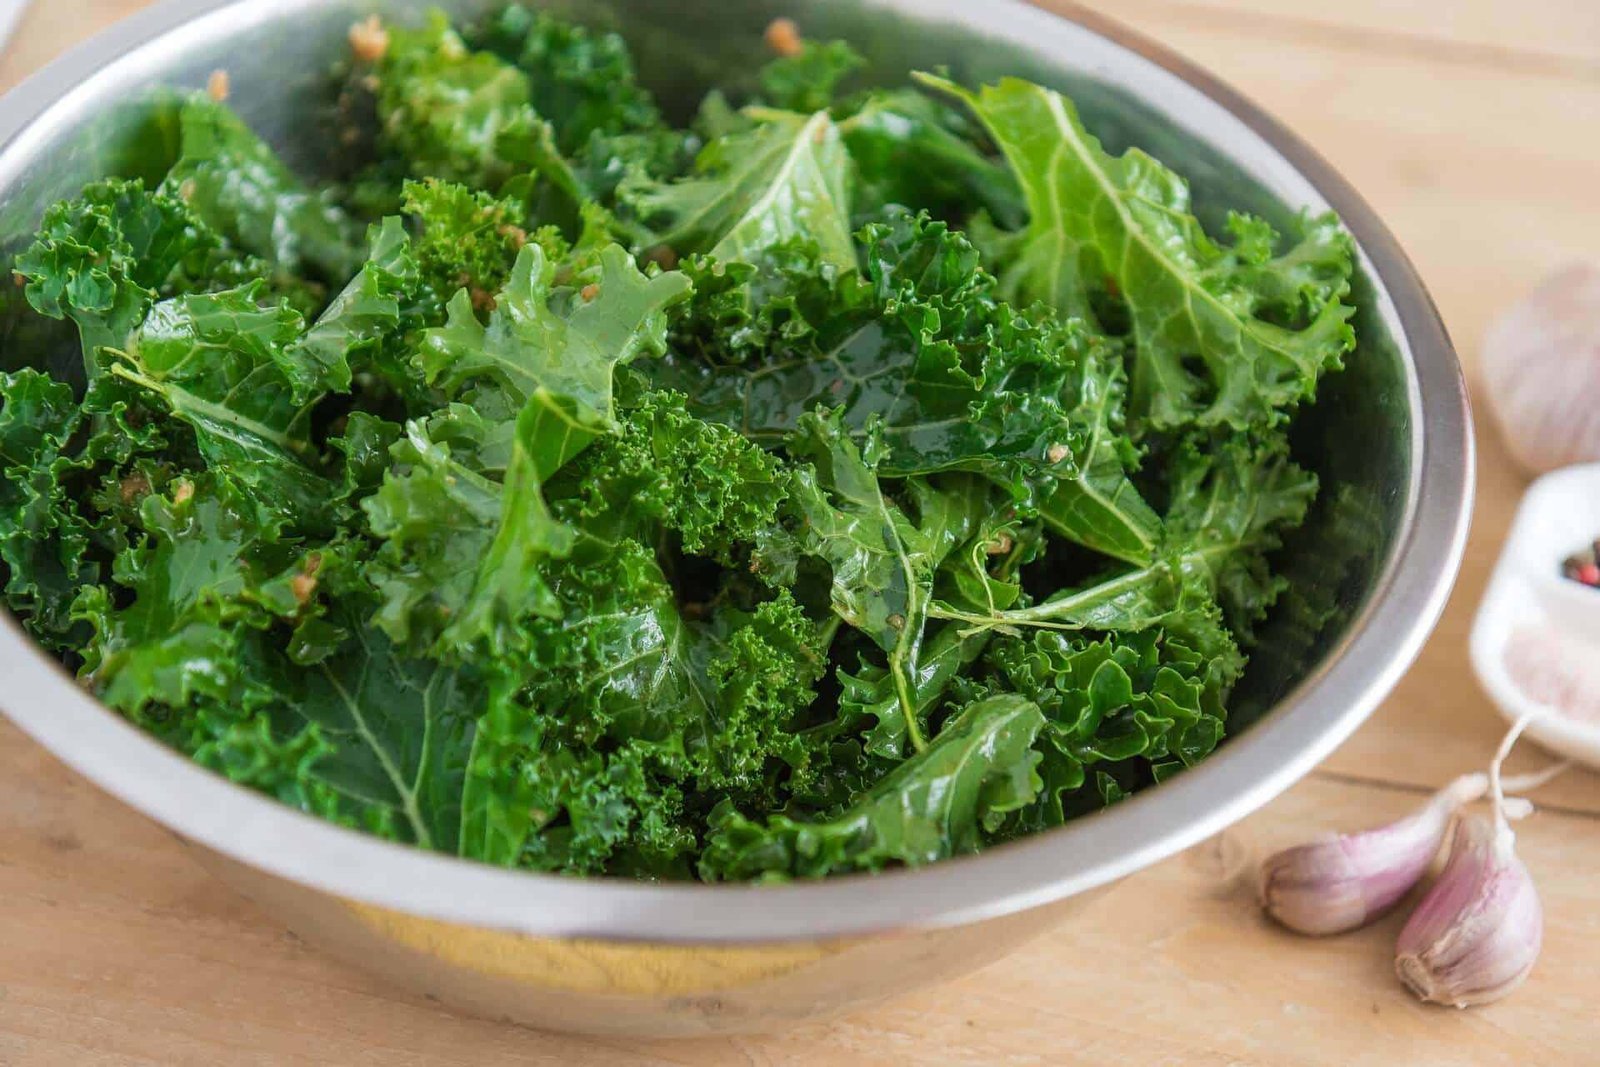 metal bowl full of kale with garlic next to it on a wooden backdrop